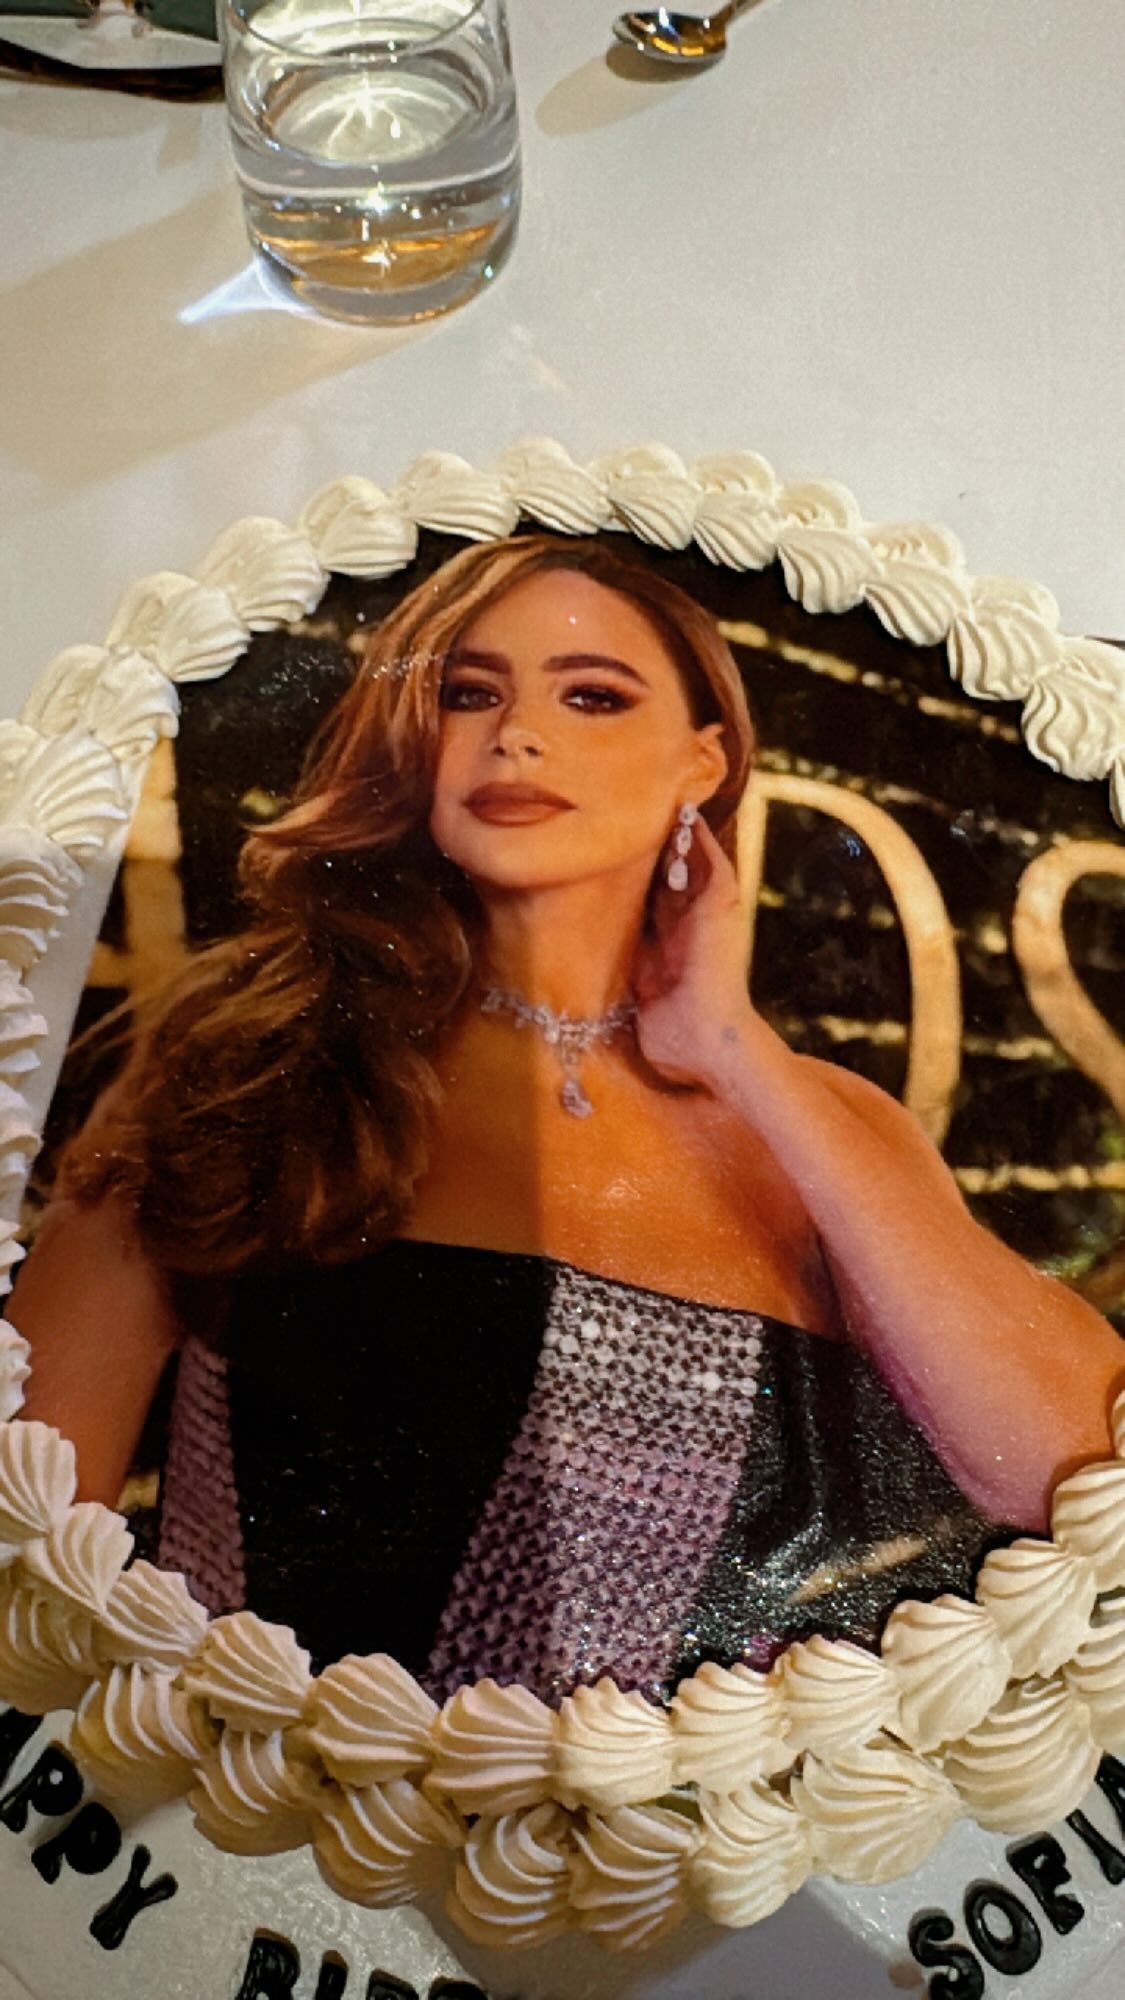 One of Sofia Vergara's birthday cakes included a photo of the actress atop the dessert